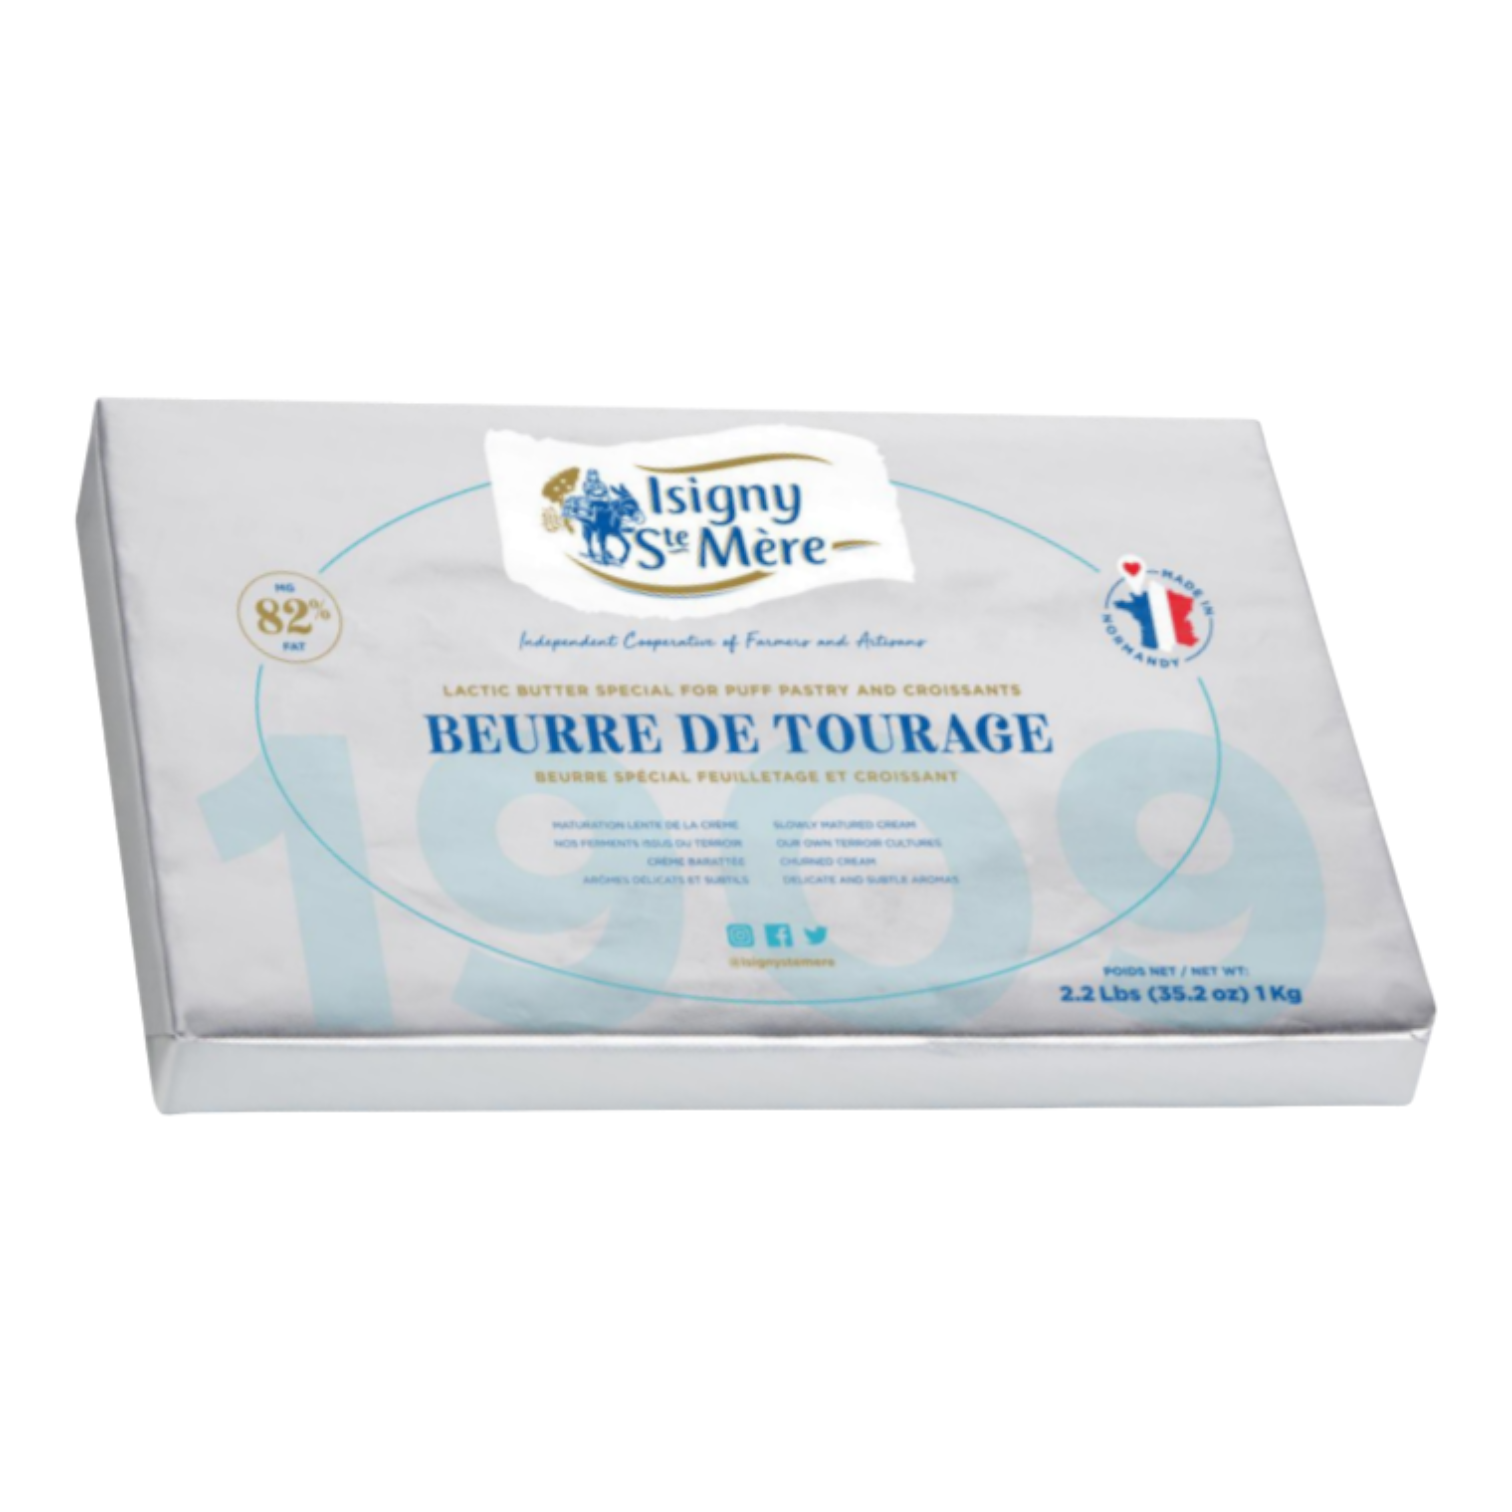 🇫🇷 Professional Pastry Sheet Butter ‘beurre De Tourage 82 By Isigny Sainte Mère 22 Lbs 1kg 